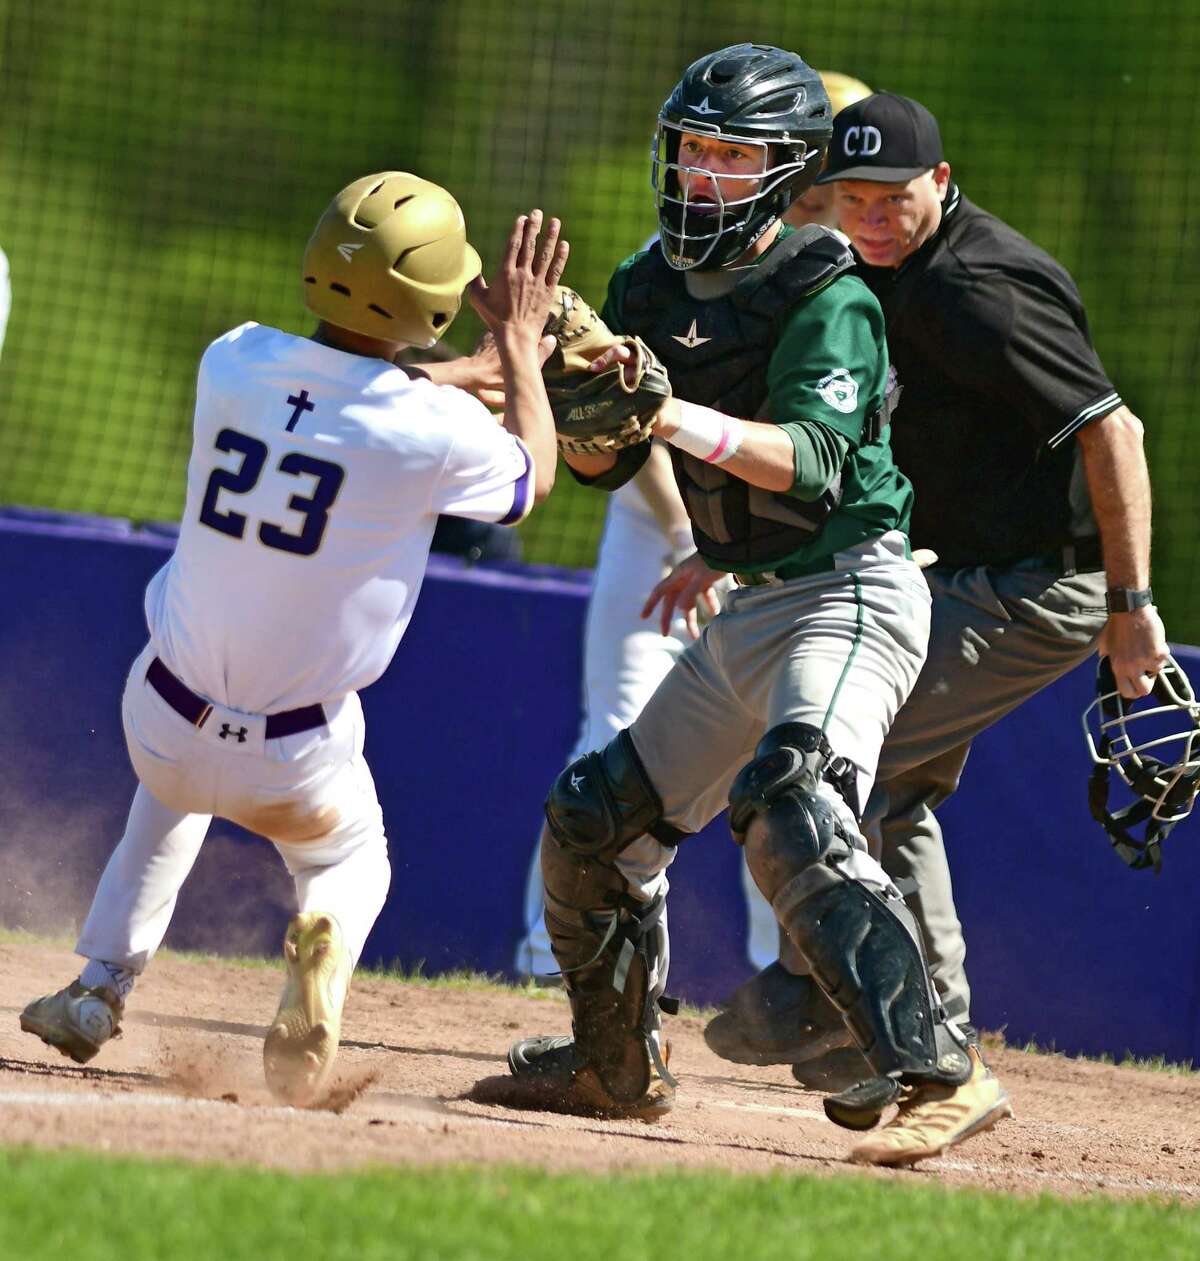 Shenendehowa catcher Jack Voce tags out Christian Brothers Academy's Michael Hicks at home plate during a baseball game on Thursday, May 16, 2019 in Colonie, N.Y. (Lori Van Buren/Times Union)